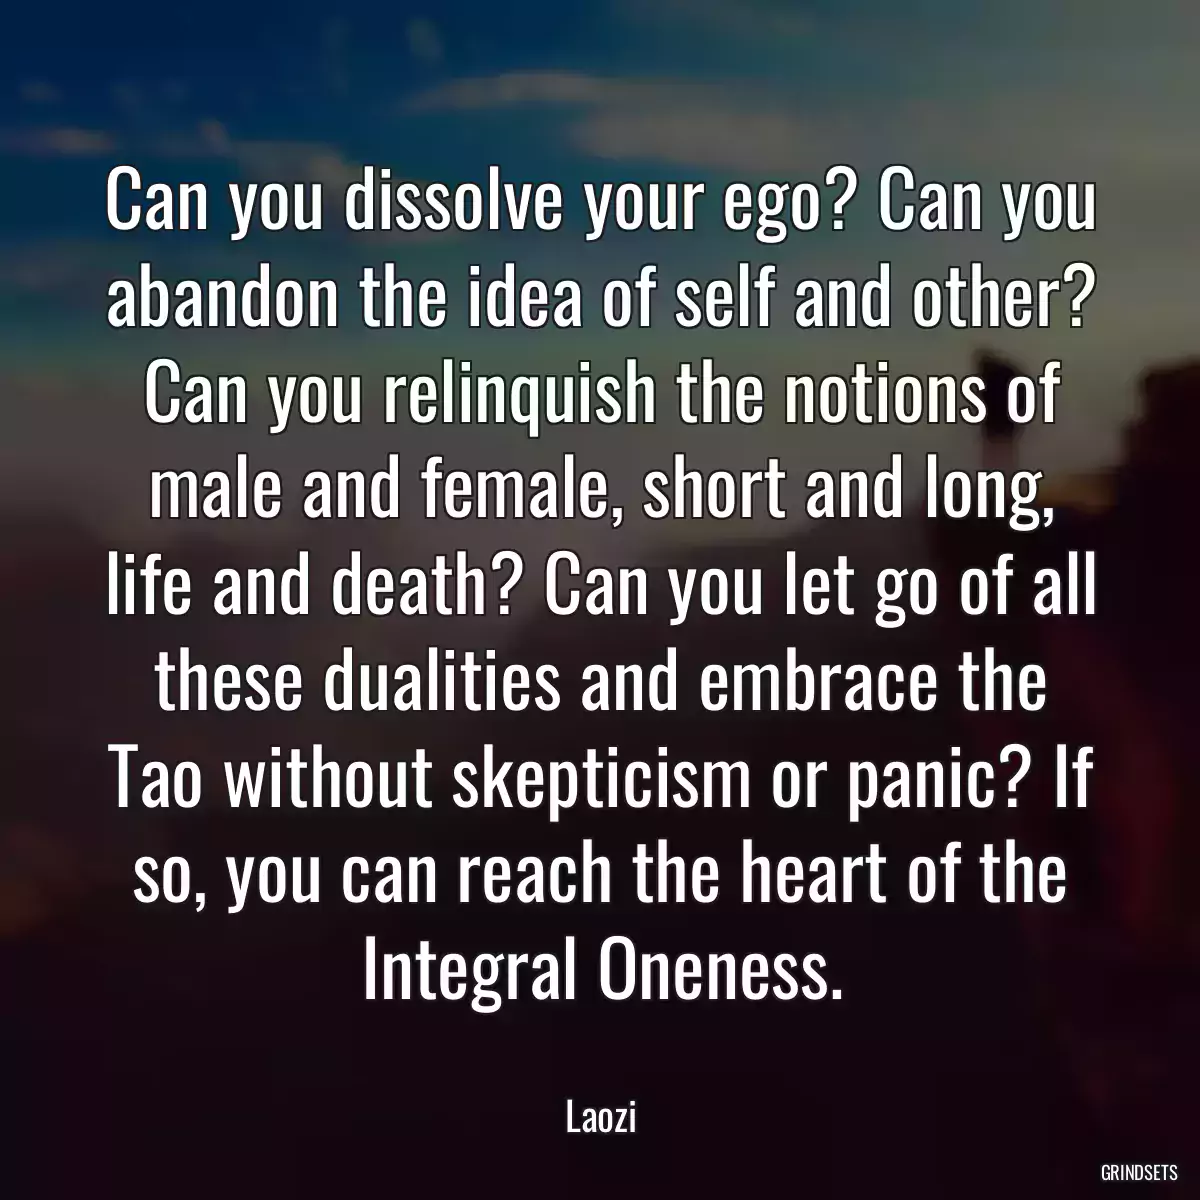 Can you dissolve your ego? Can you abandon the idea of self and other? Can you relinquish the notions of male and female, short and long, life and death? Can you let go of all these dualities and embrace the Tao without skepticism or panic? If so, you can reach the heart of the Integral Oneness.